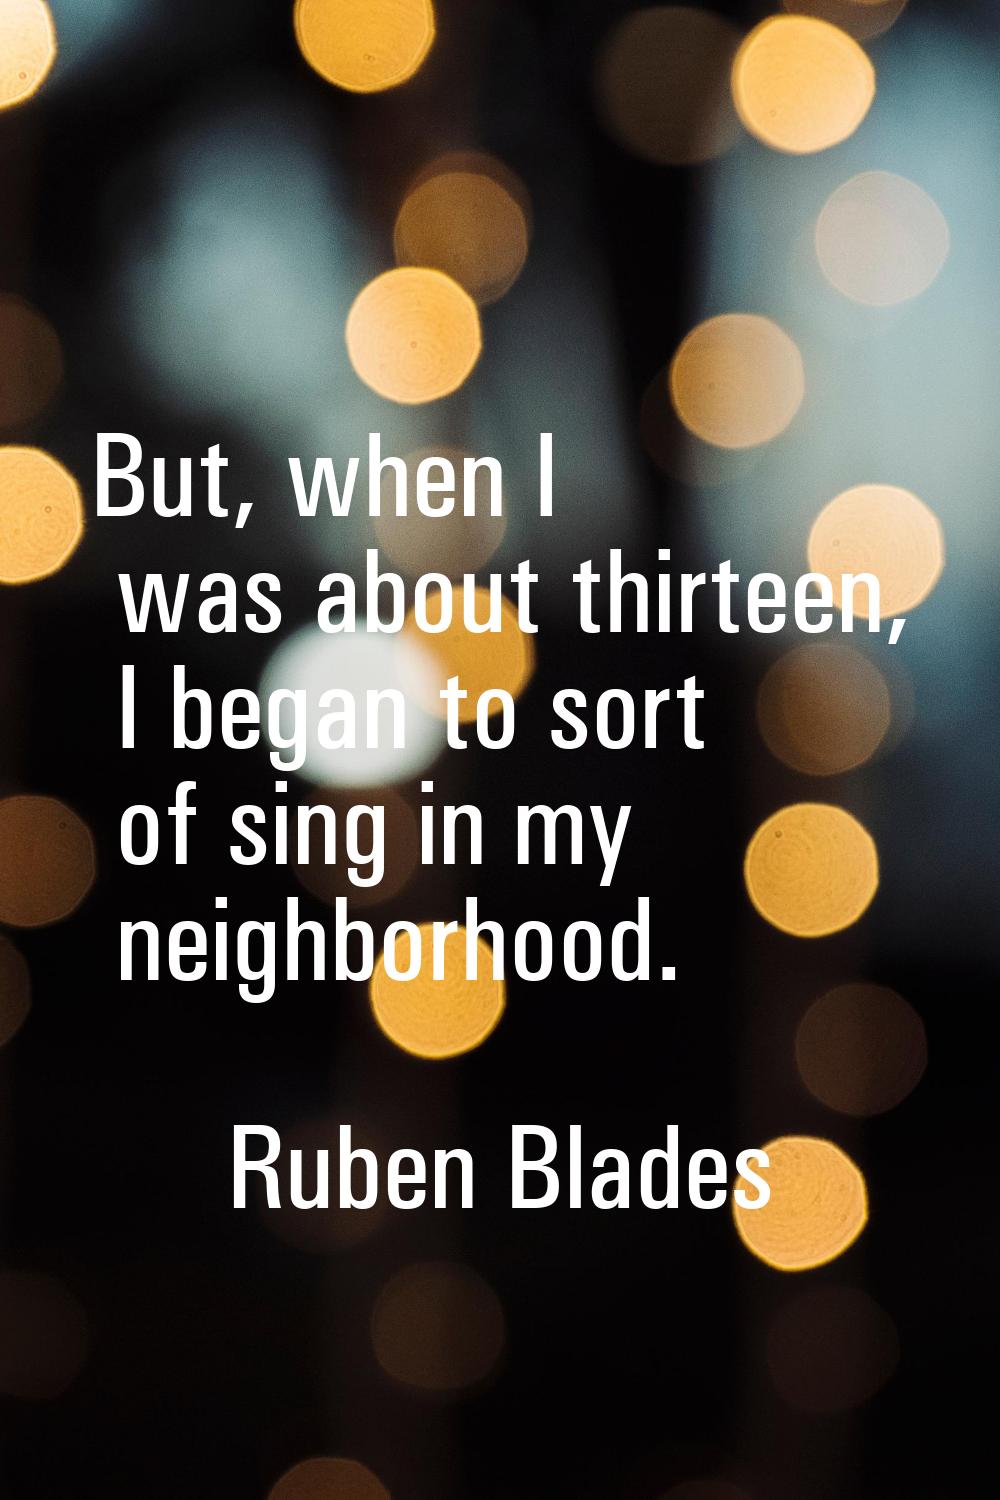 But, when I was about thirteen, I began to sort of sing in my neighborhood.